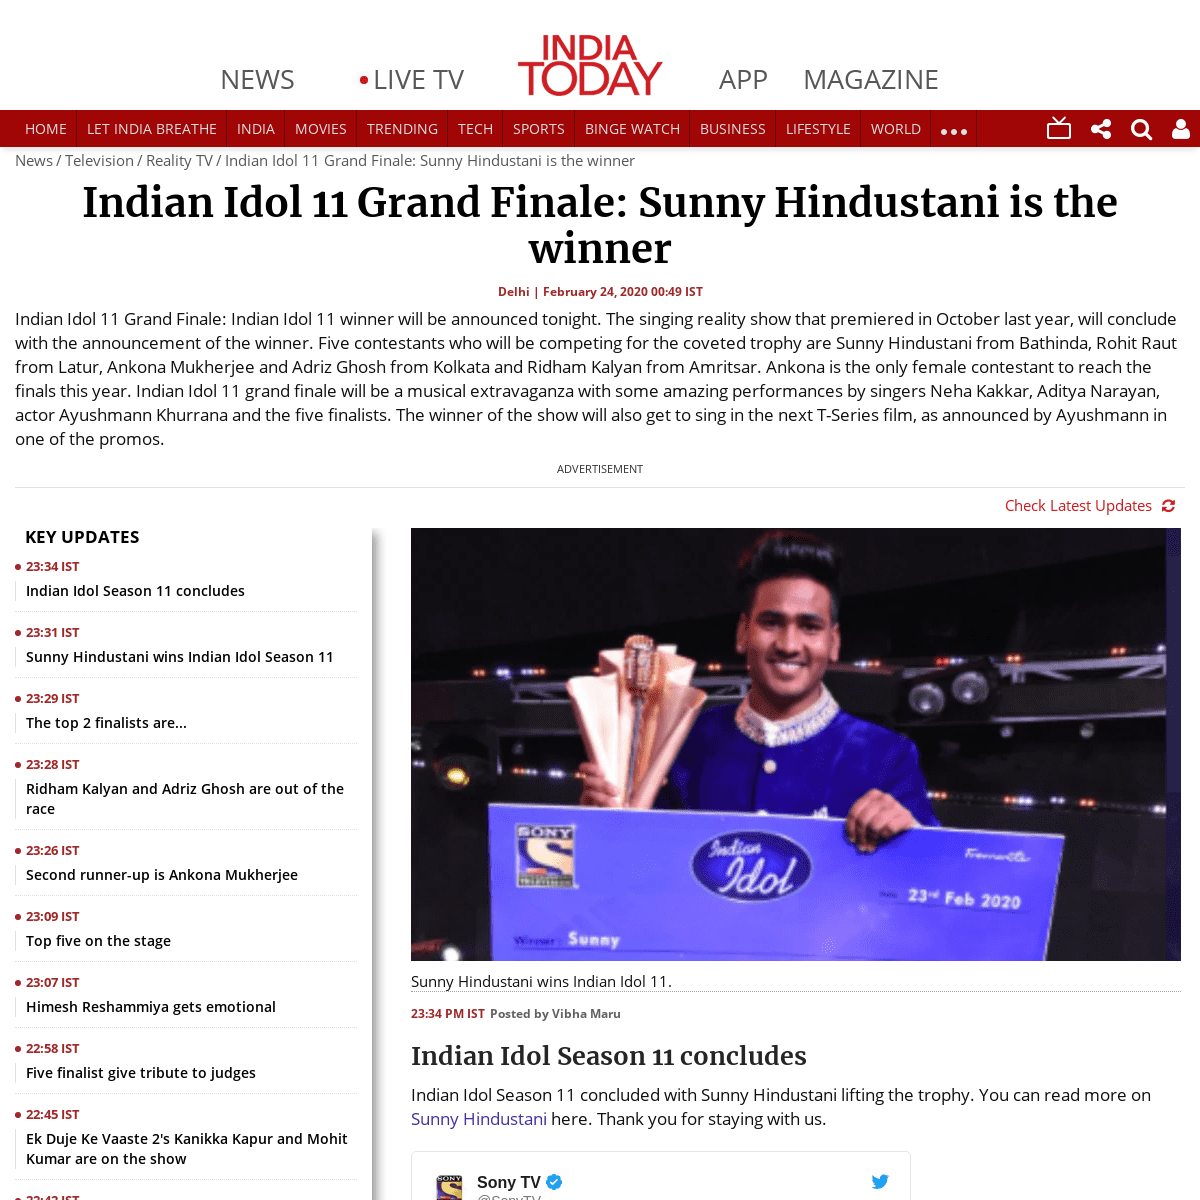 A complete backup of www.indiatoday.in/television/reality-tv/story/indian-idol-11-grand-finale-live-updates-1649265-2020-02-23